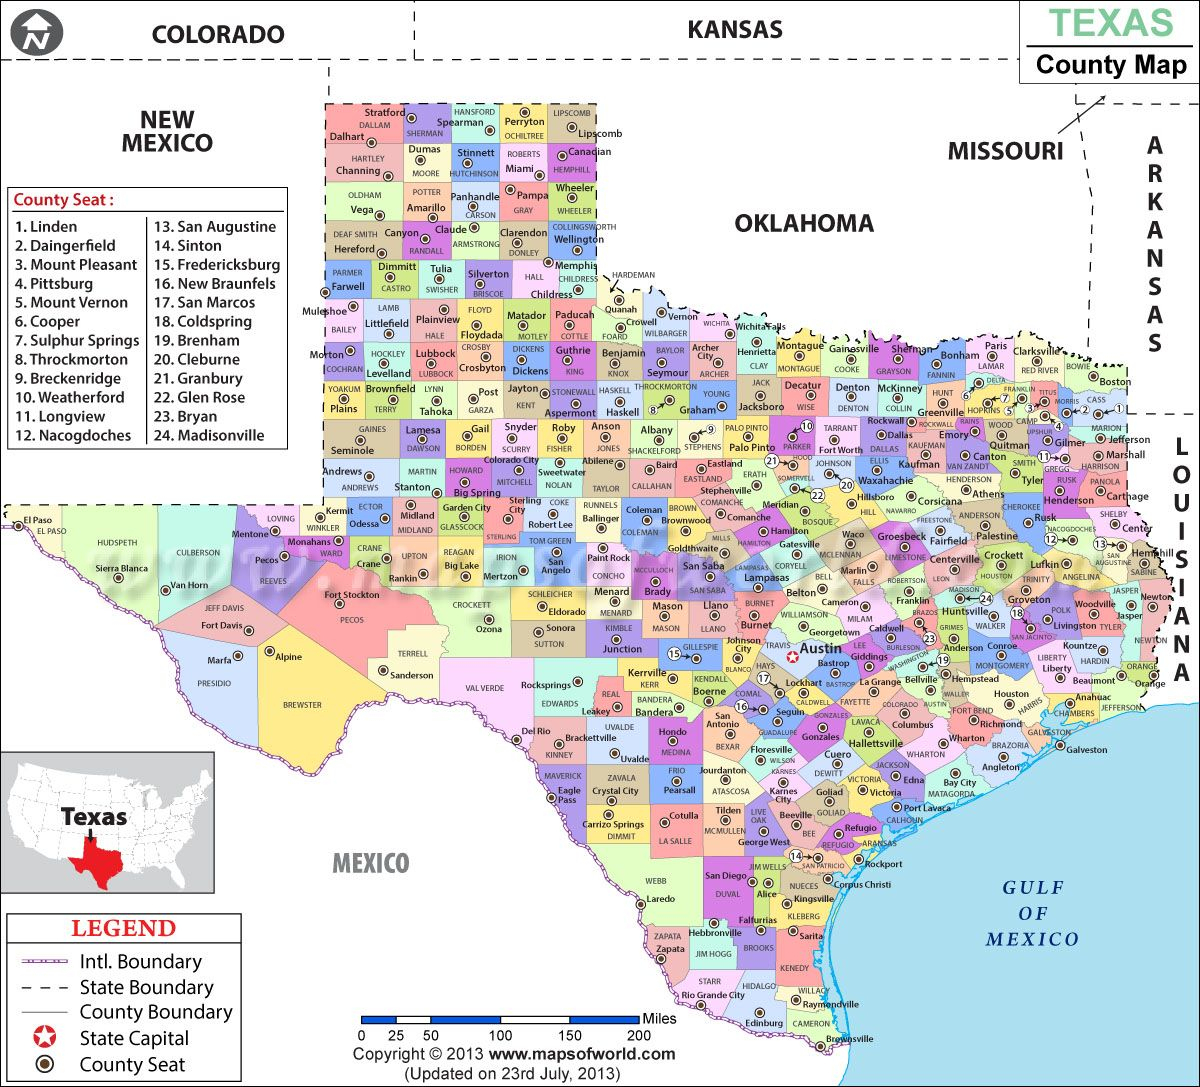 Texas County Map - Thought It Would Be Fun To Do The Texas County - State Map Of Texas Showing Cities